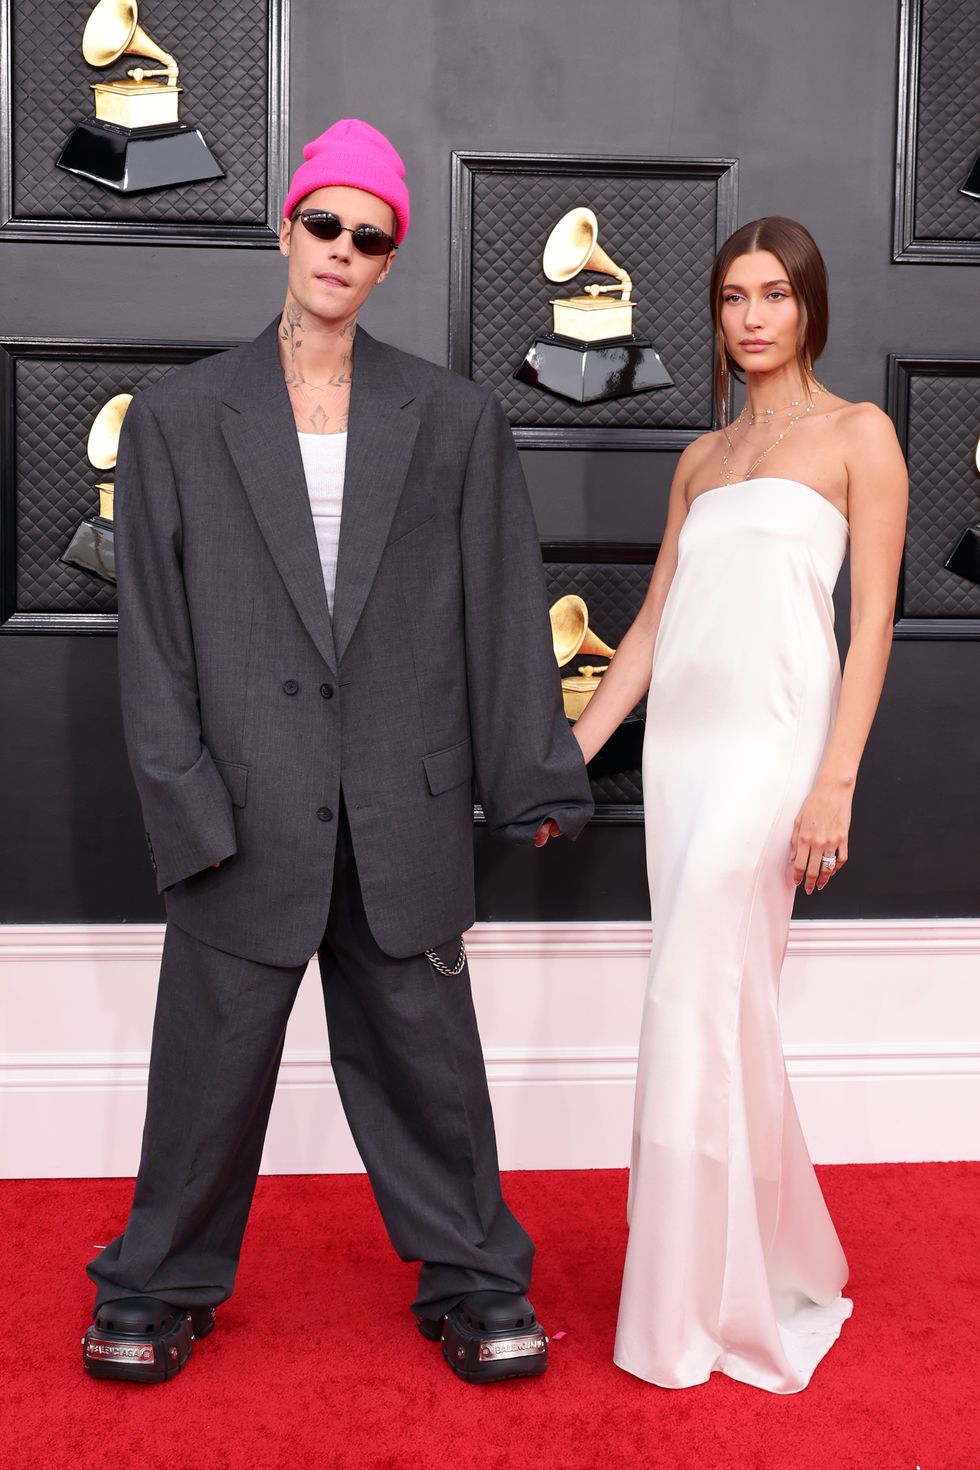 See Hailey Bieber's and Justin Bieber's Grammys RedCarpet Looks